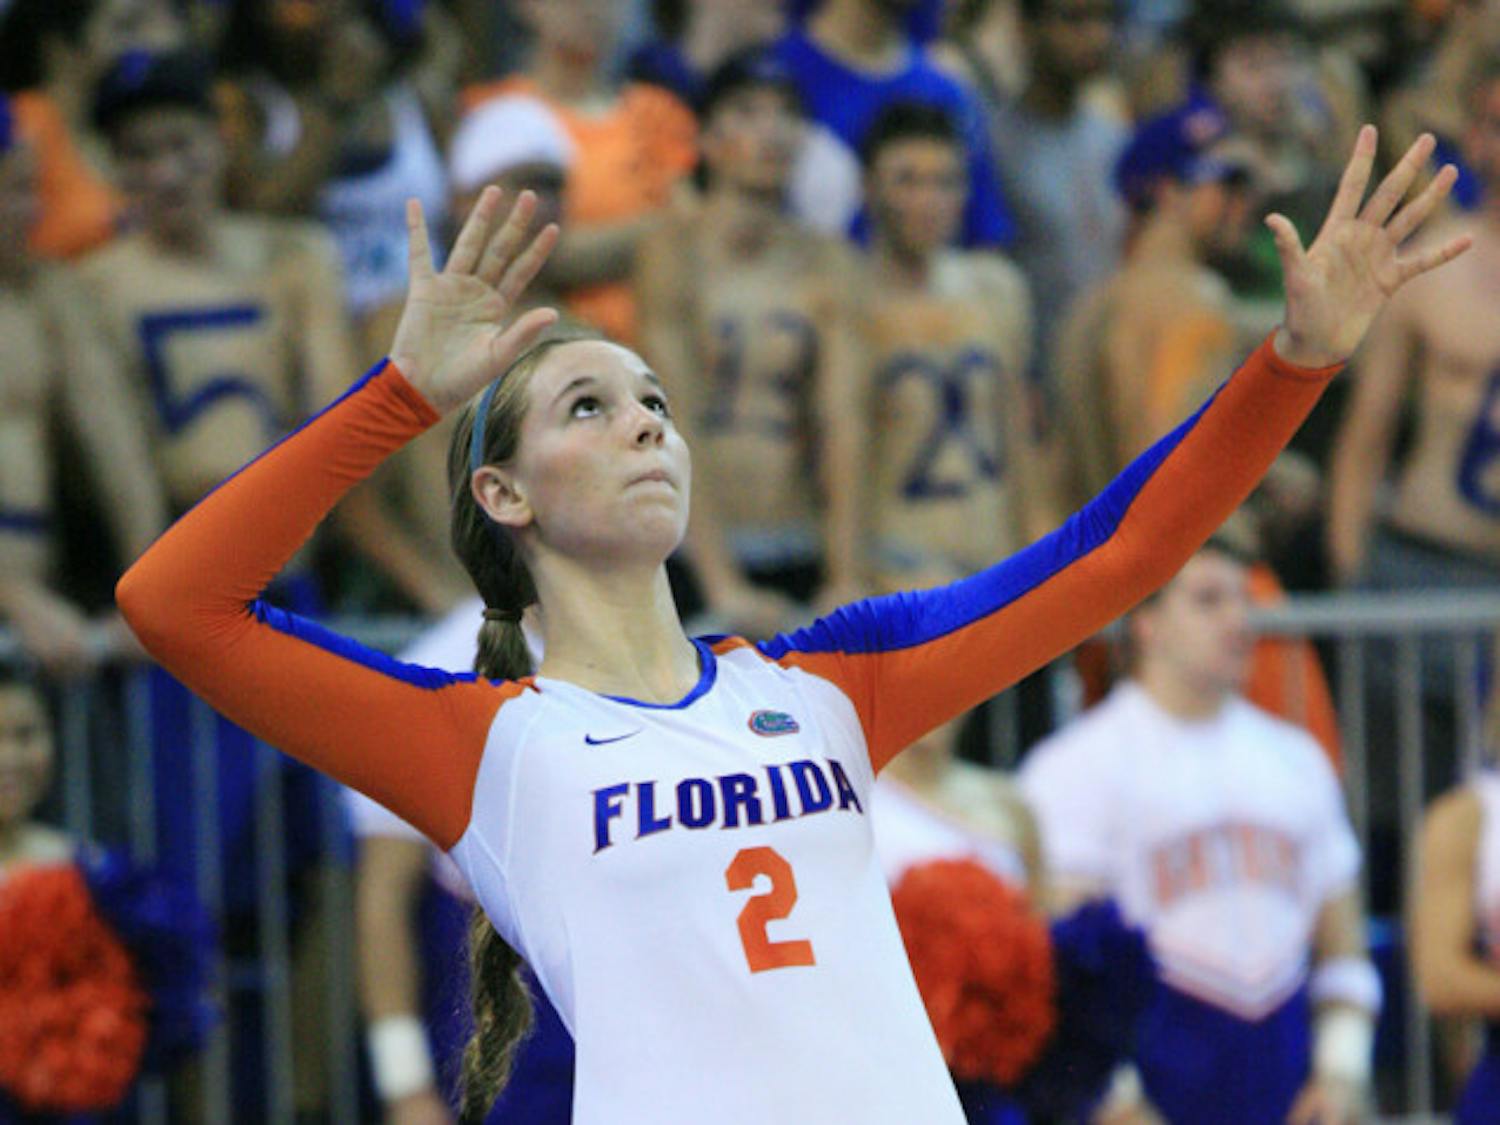 Sophomore setter Dana Backlund serves the ball during Florida’s 3-0 win against Jacksonville on Sept. 7, 2012, in the O’Connell Center.